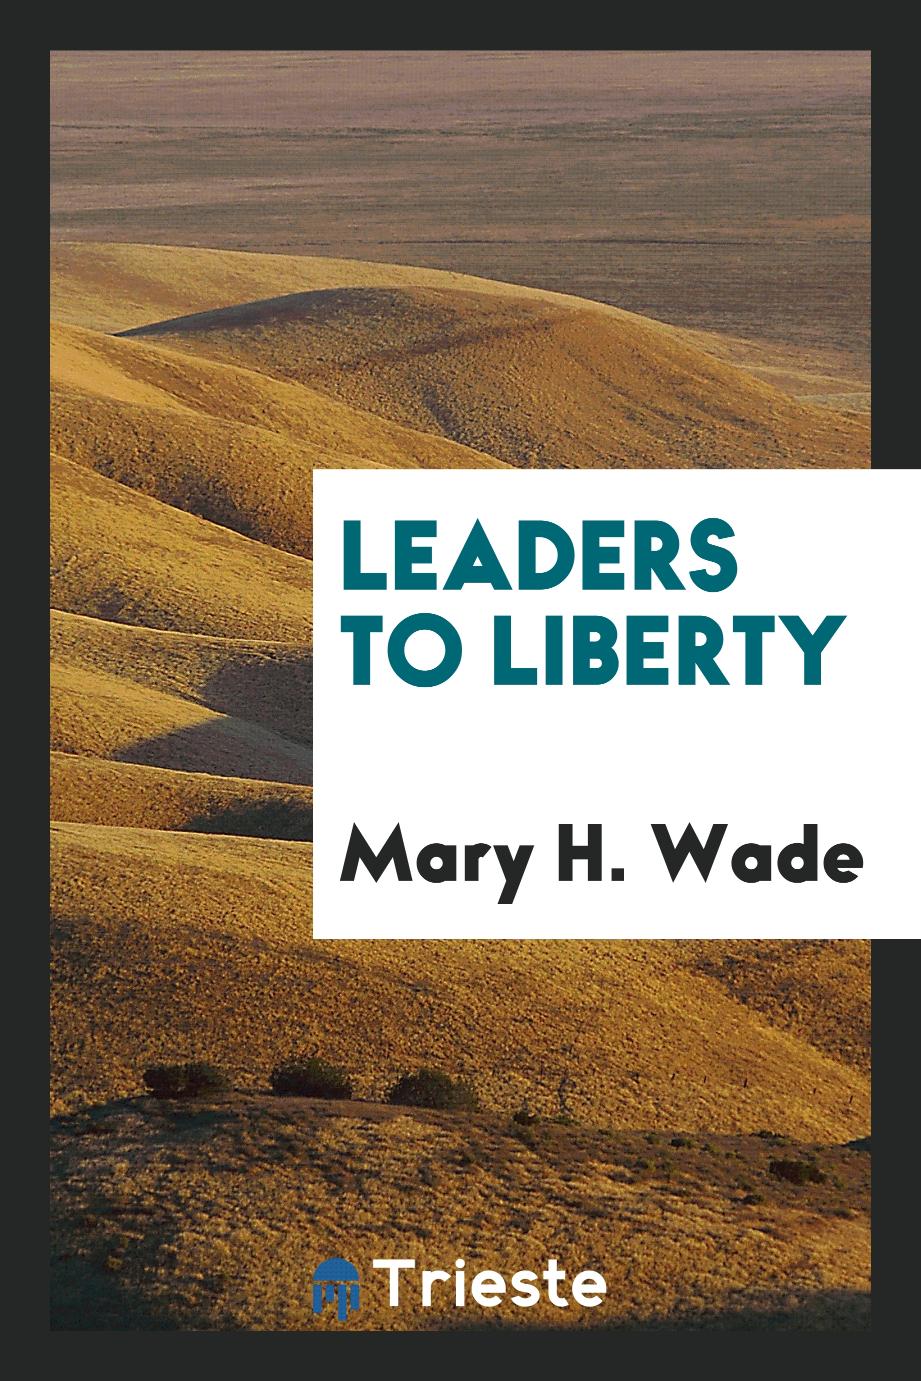 Leaders to liberty